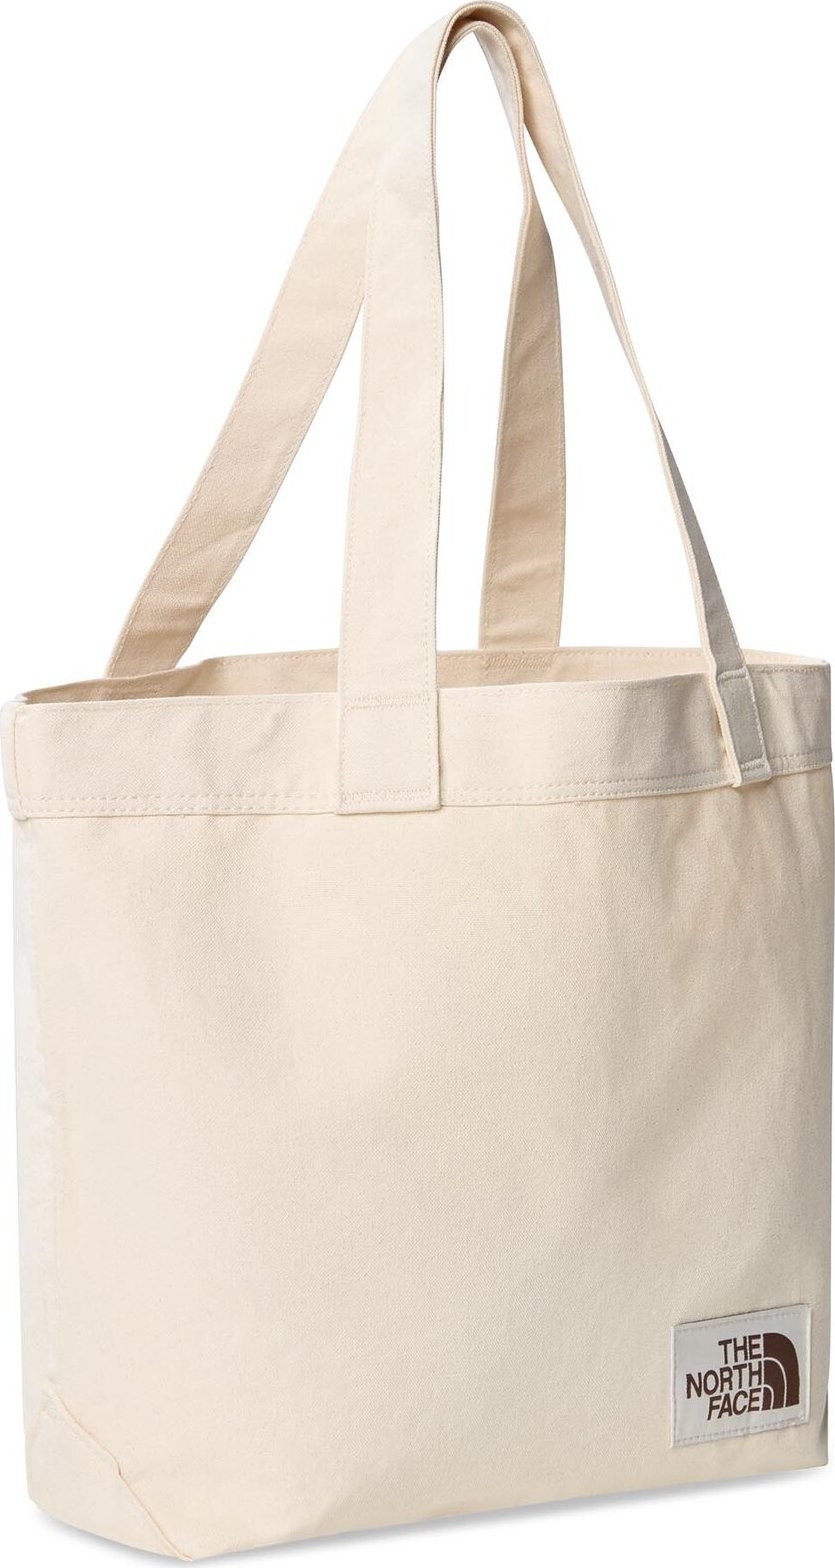 Kabelka The North Face Cotton Tote NF0A3VWQIX01 Halfdome Graphic